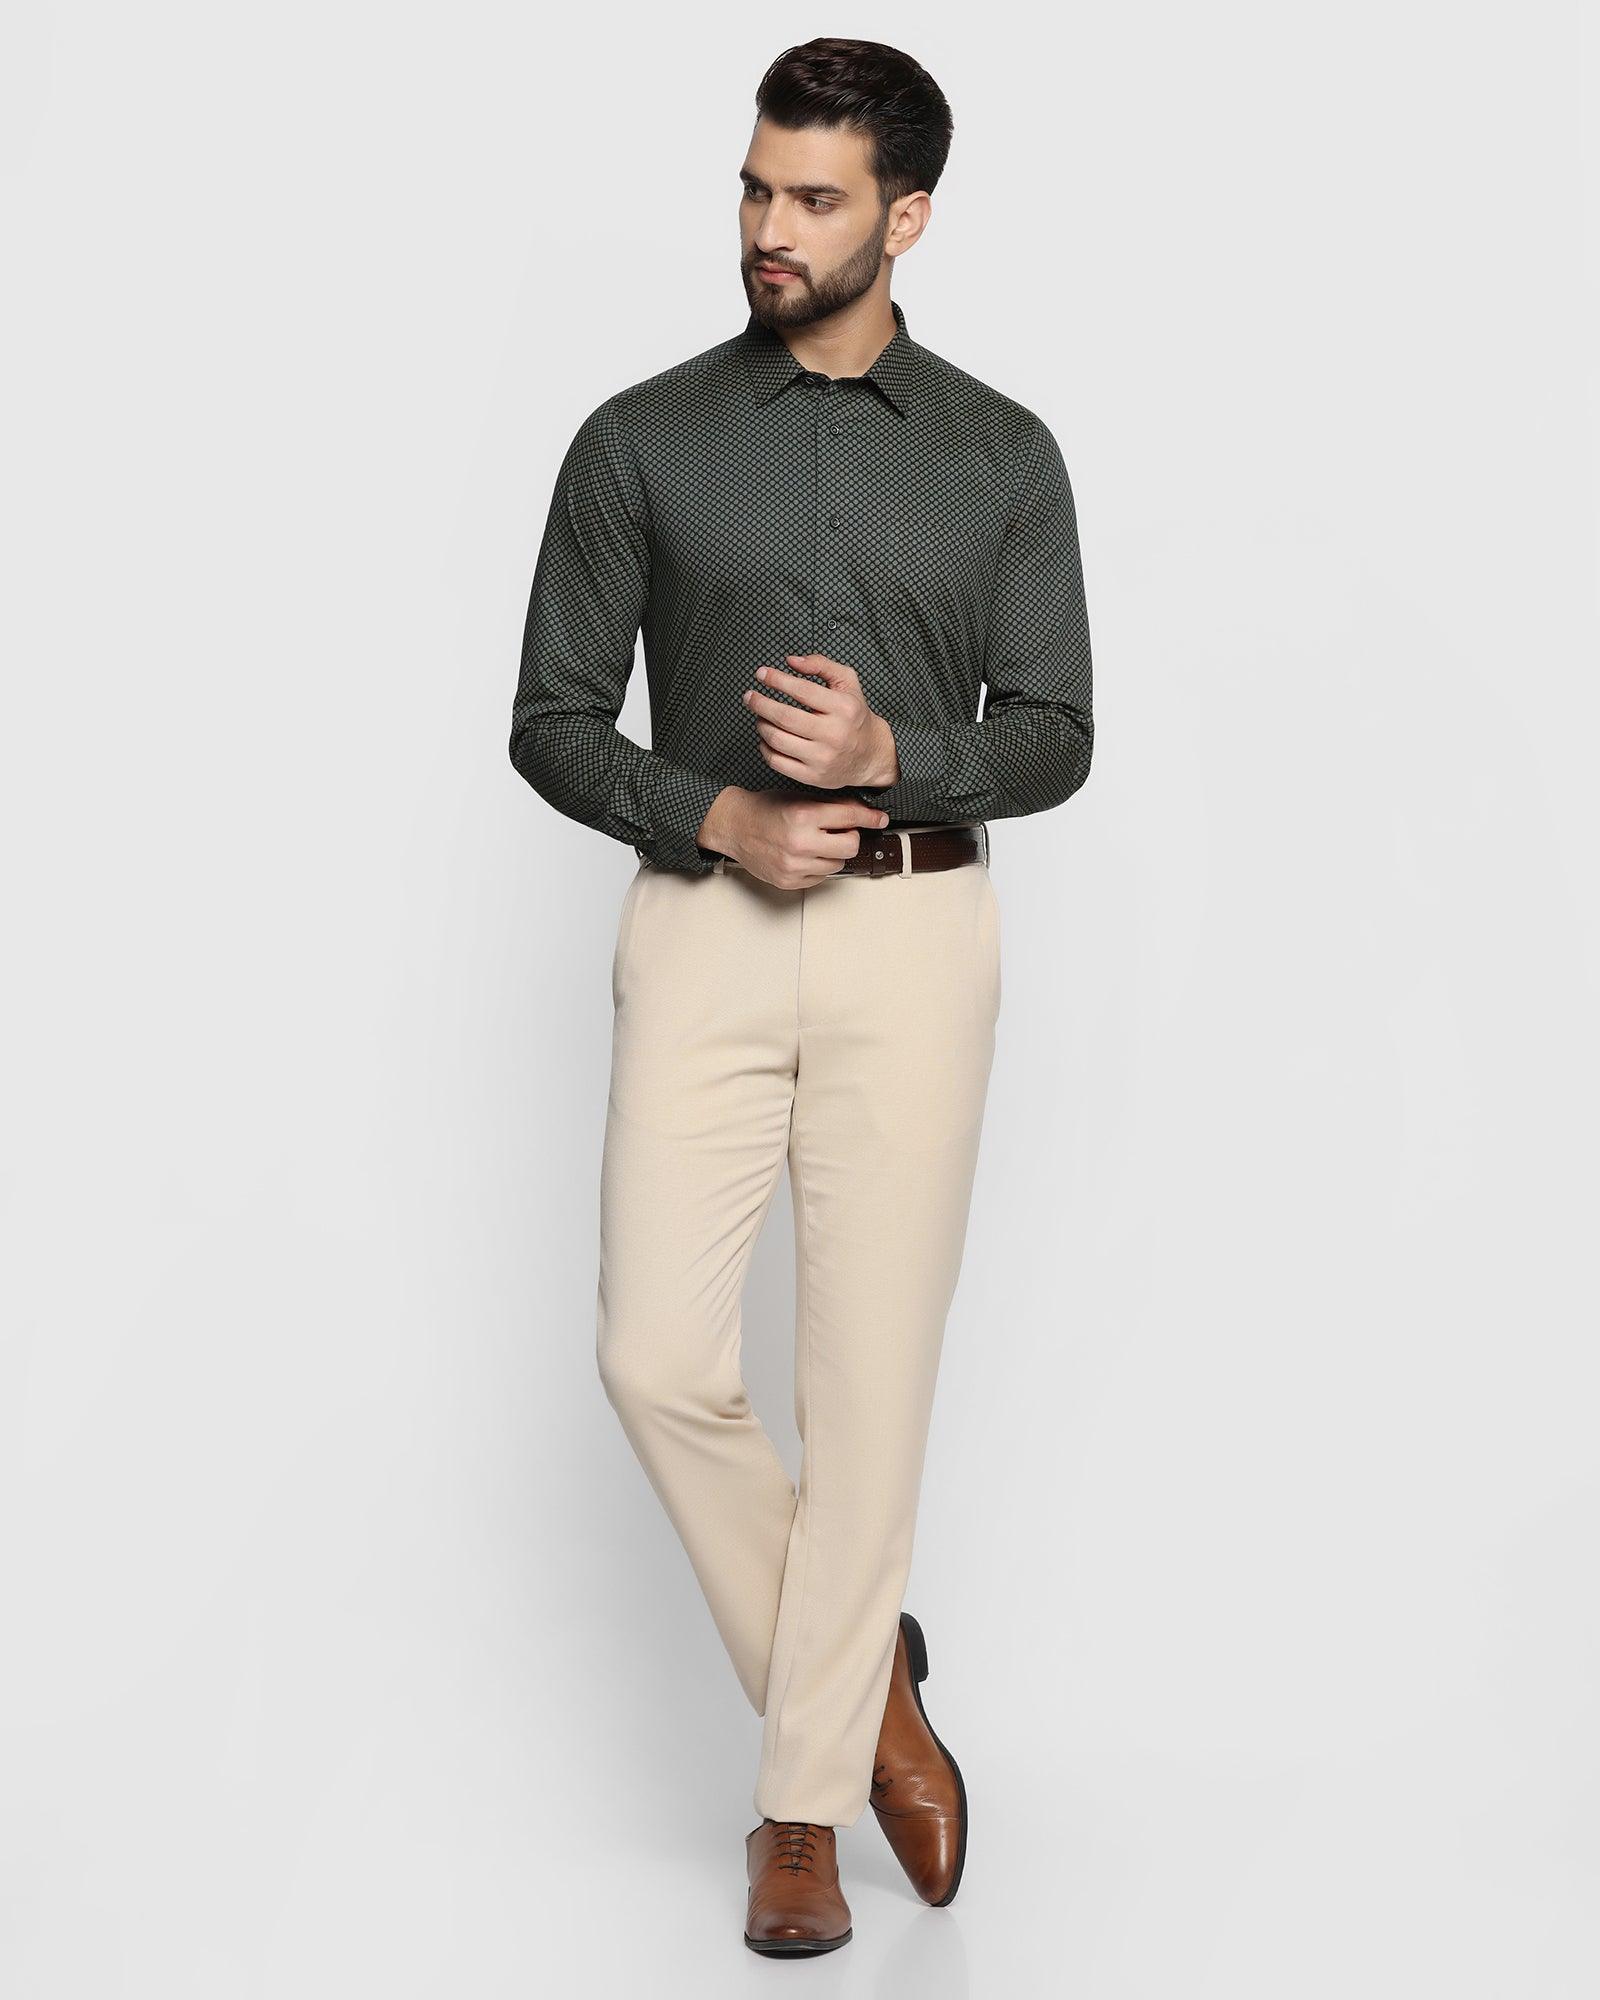 What Shirt Colors Go With Beige Tan And Cream Pants  Ready Sleek